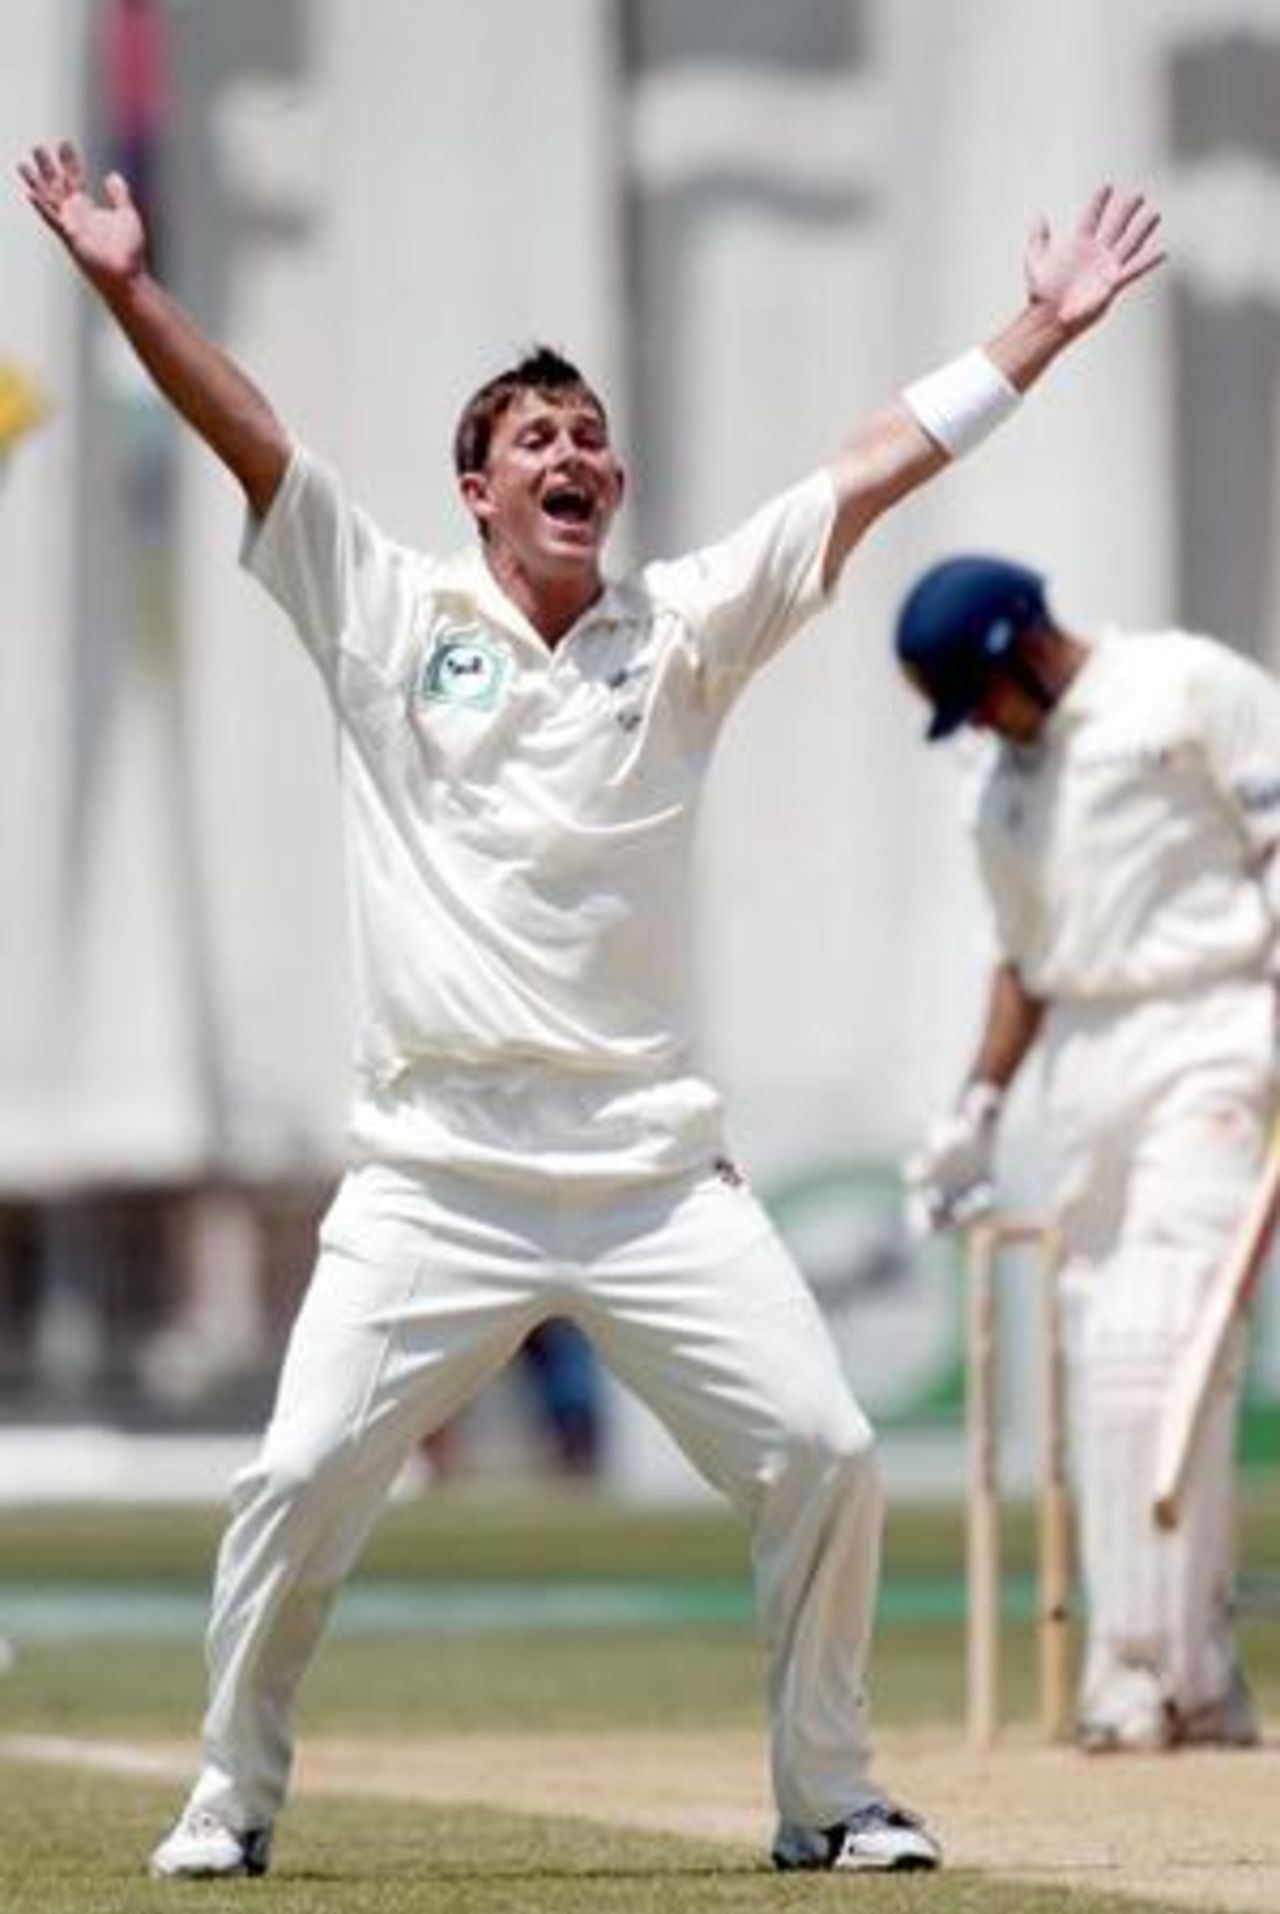 New Zealand bowler Shane Bond successfully appeals for lbw to dismiss Indian batsman Virender Sehwag in his second innings for 12. 1st Test: New Zealand v India at Basin Reserve, Wellington, 12-16 December 2002 (14 December 2002).